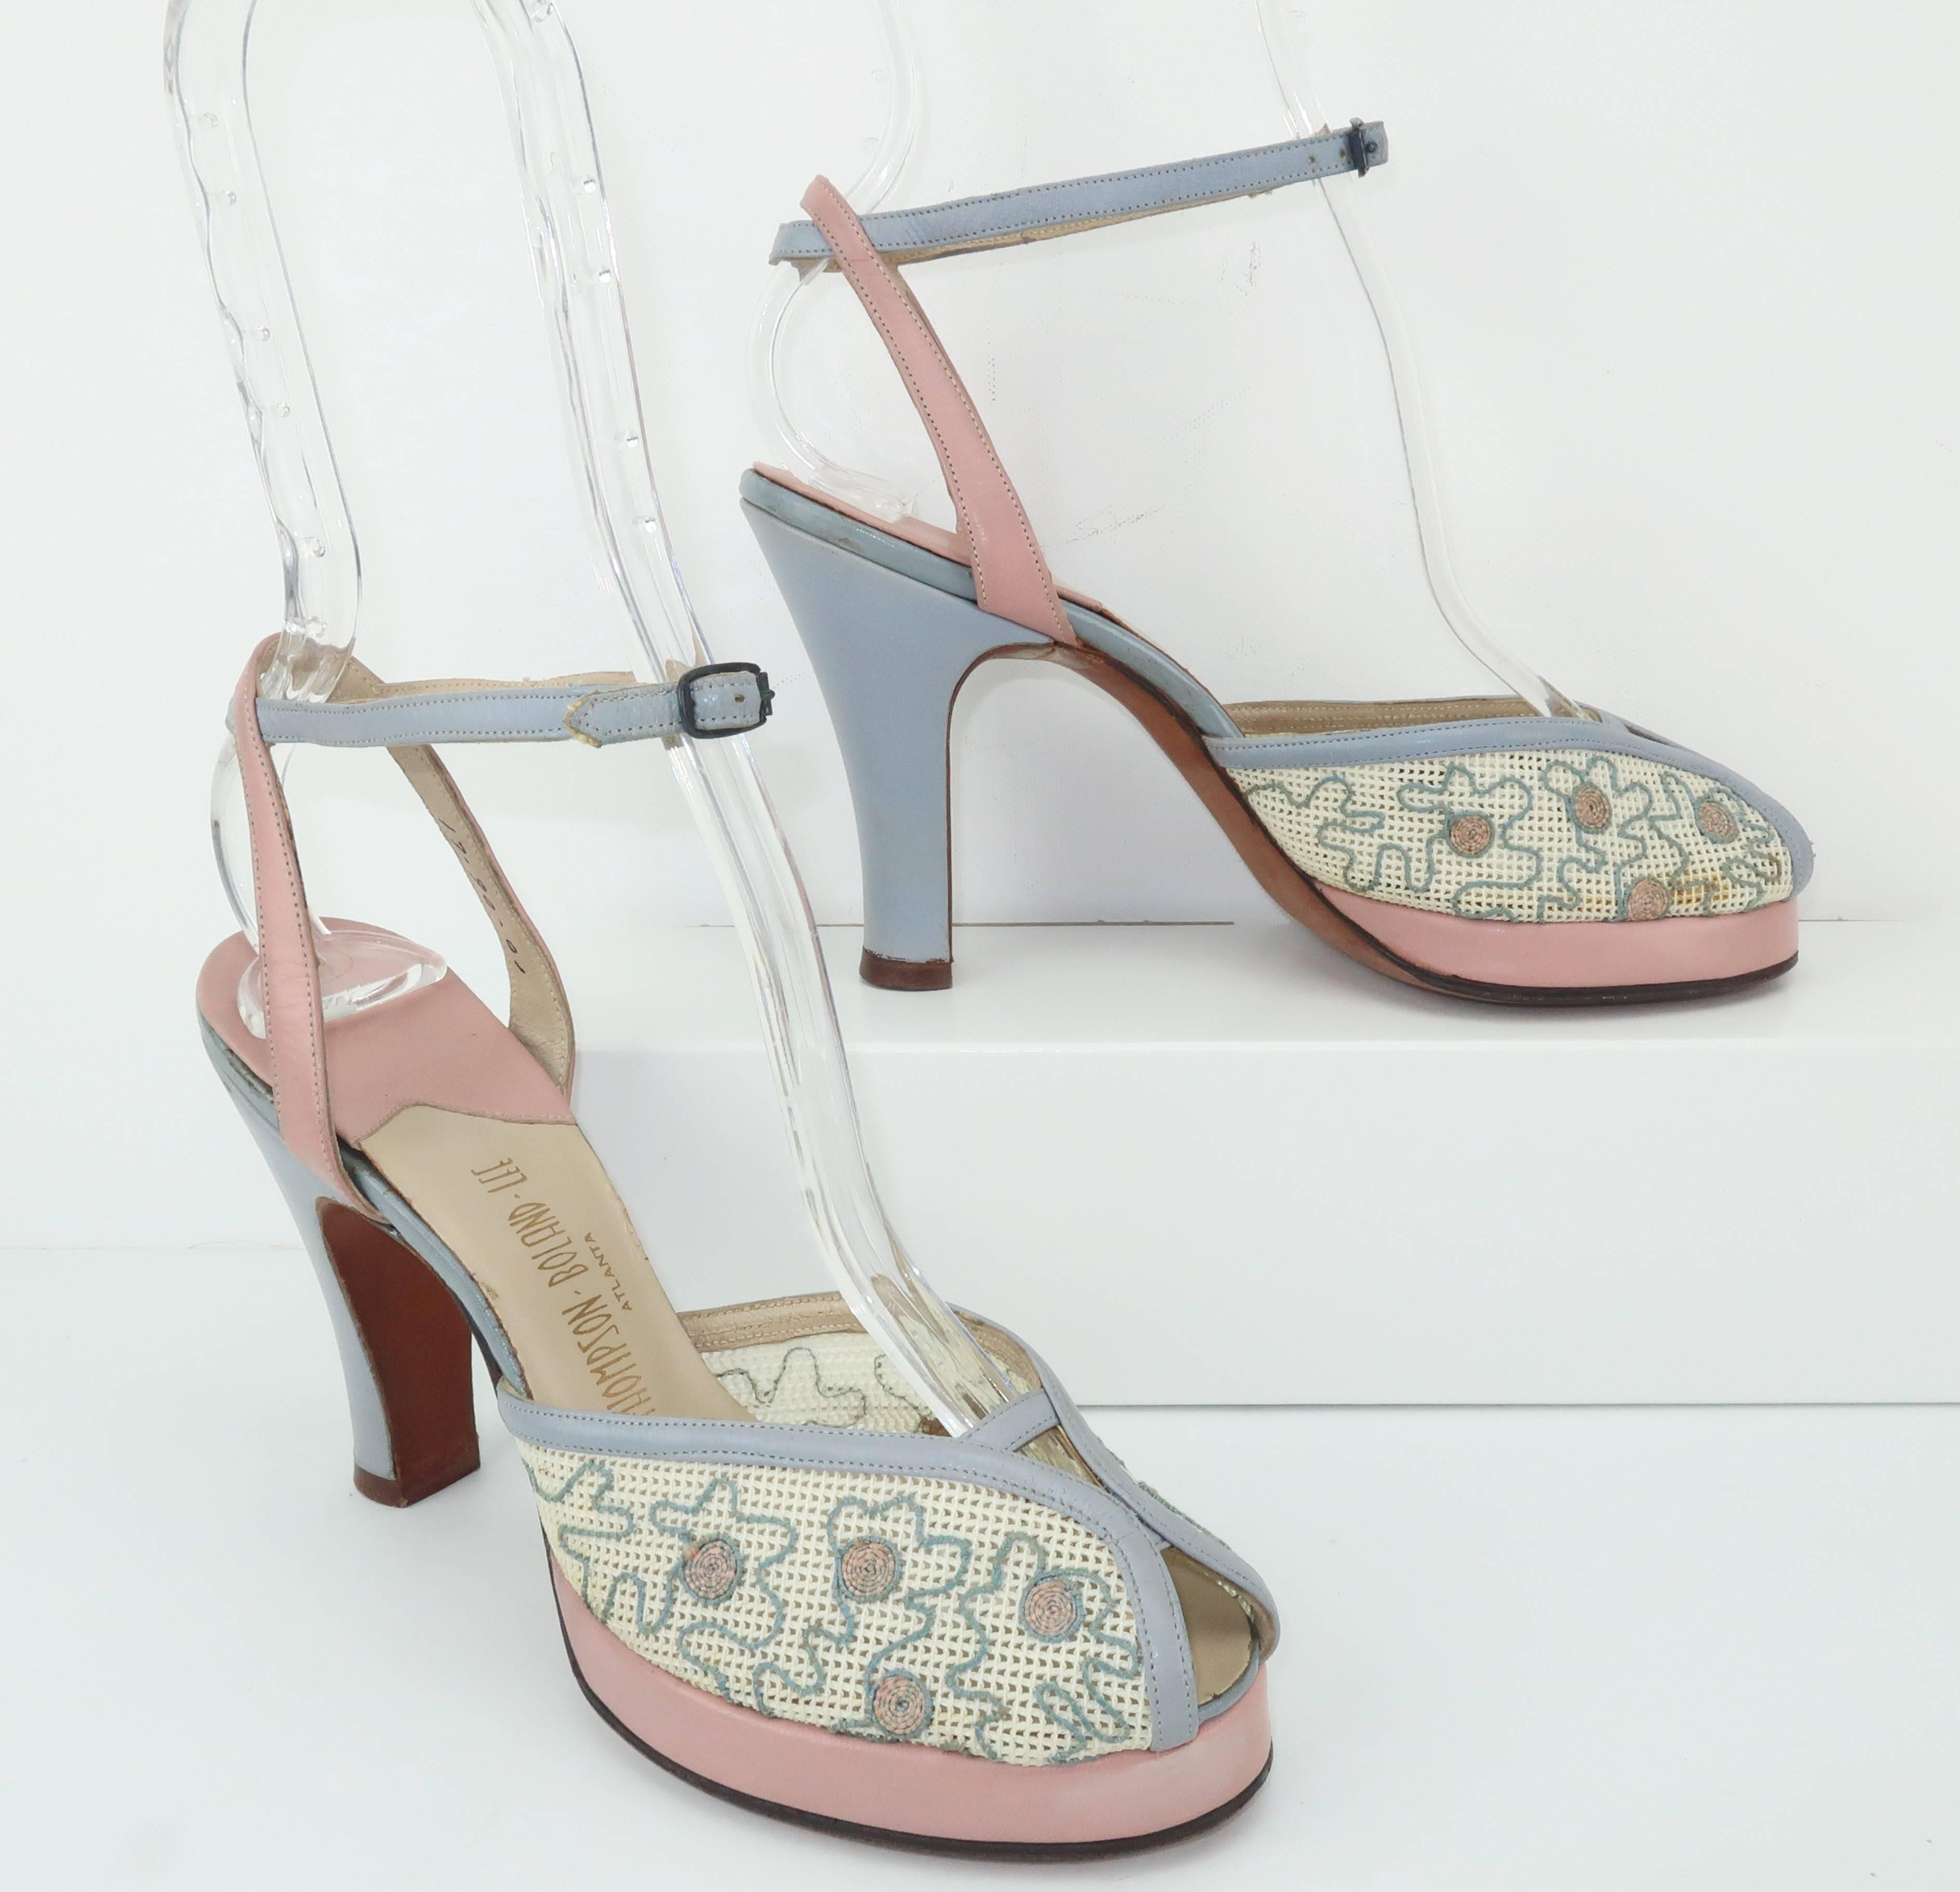 What a pleasing platform!  This pair of James Kean for Urbanites peep toe sandals are a fab combination of pink and baby blue leathers with a modest platform and adjustable ankle strap.  The vamp is decorated with cotton netting embellished with a